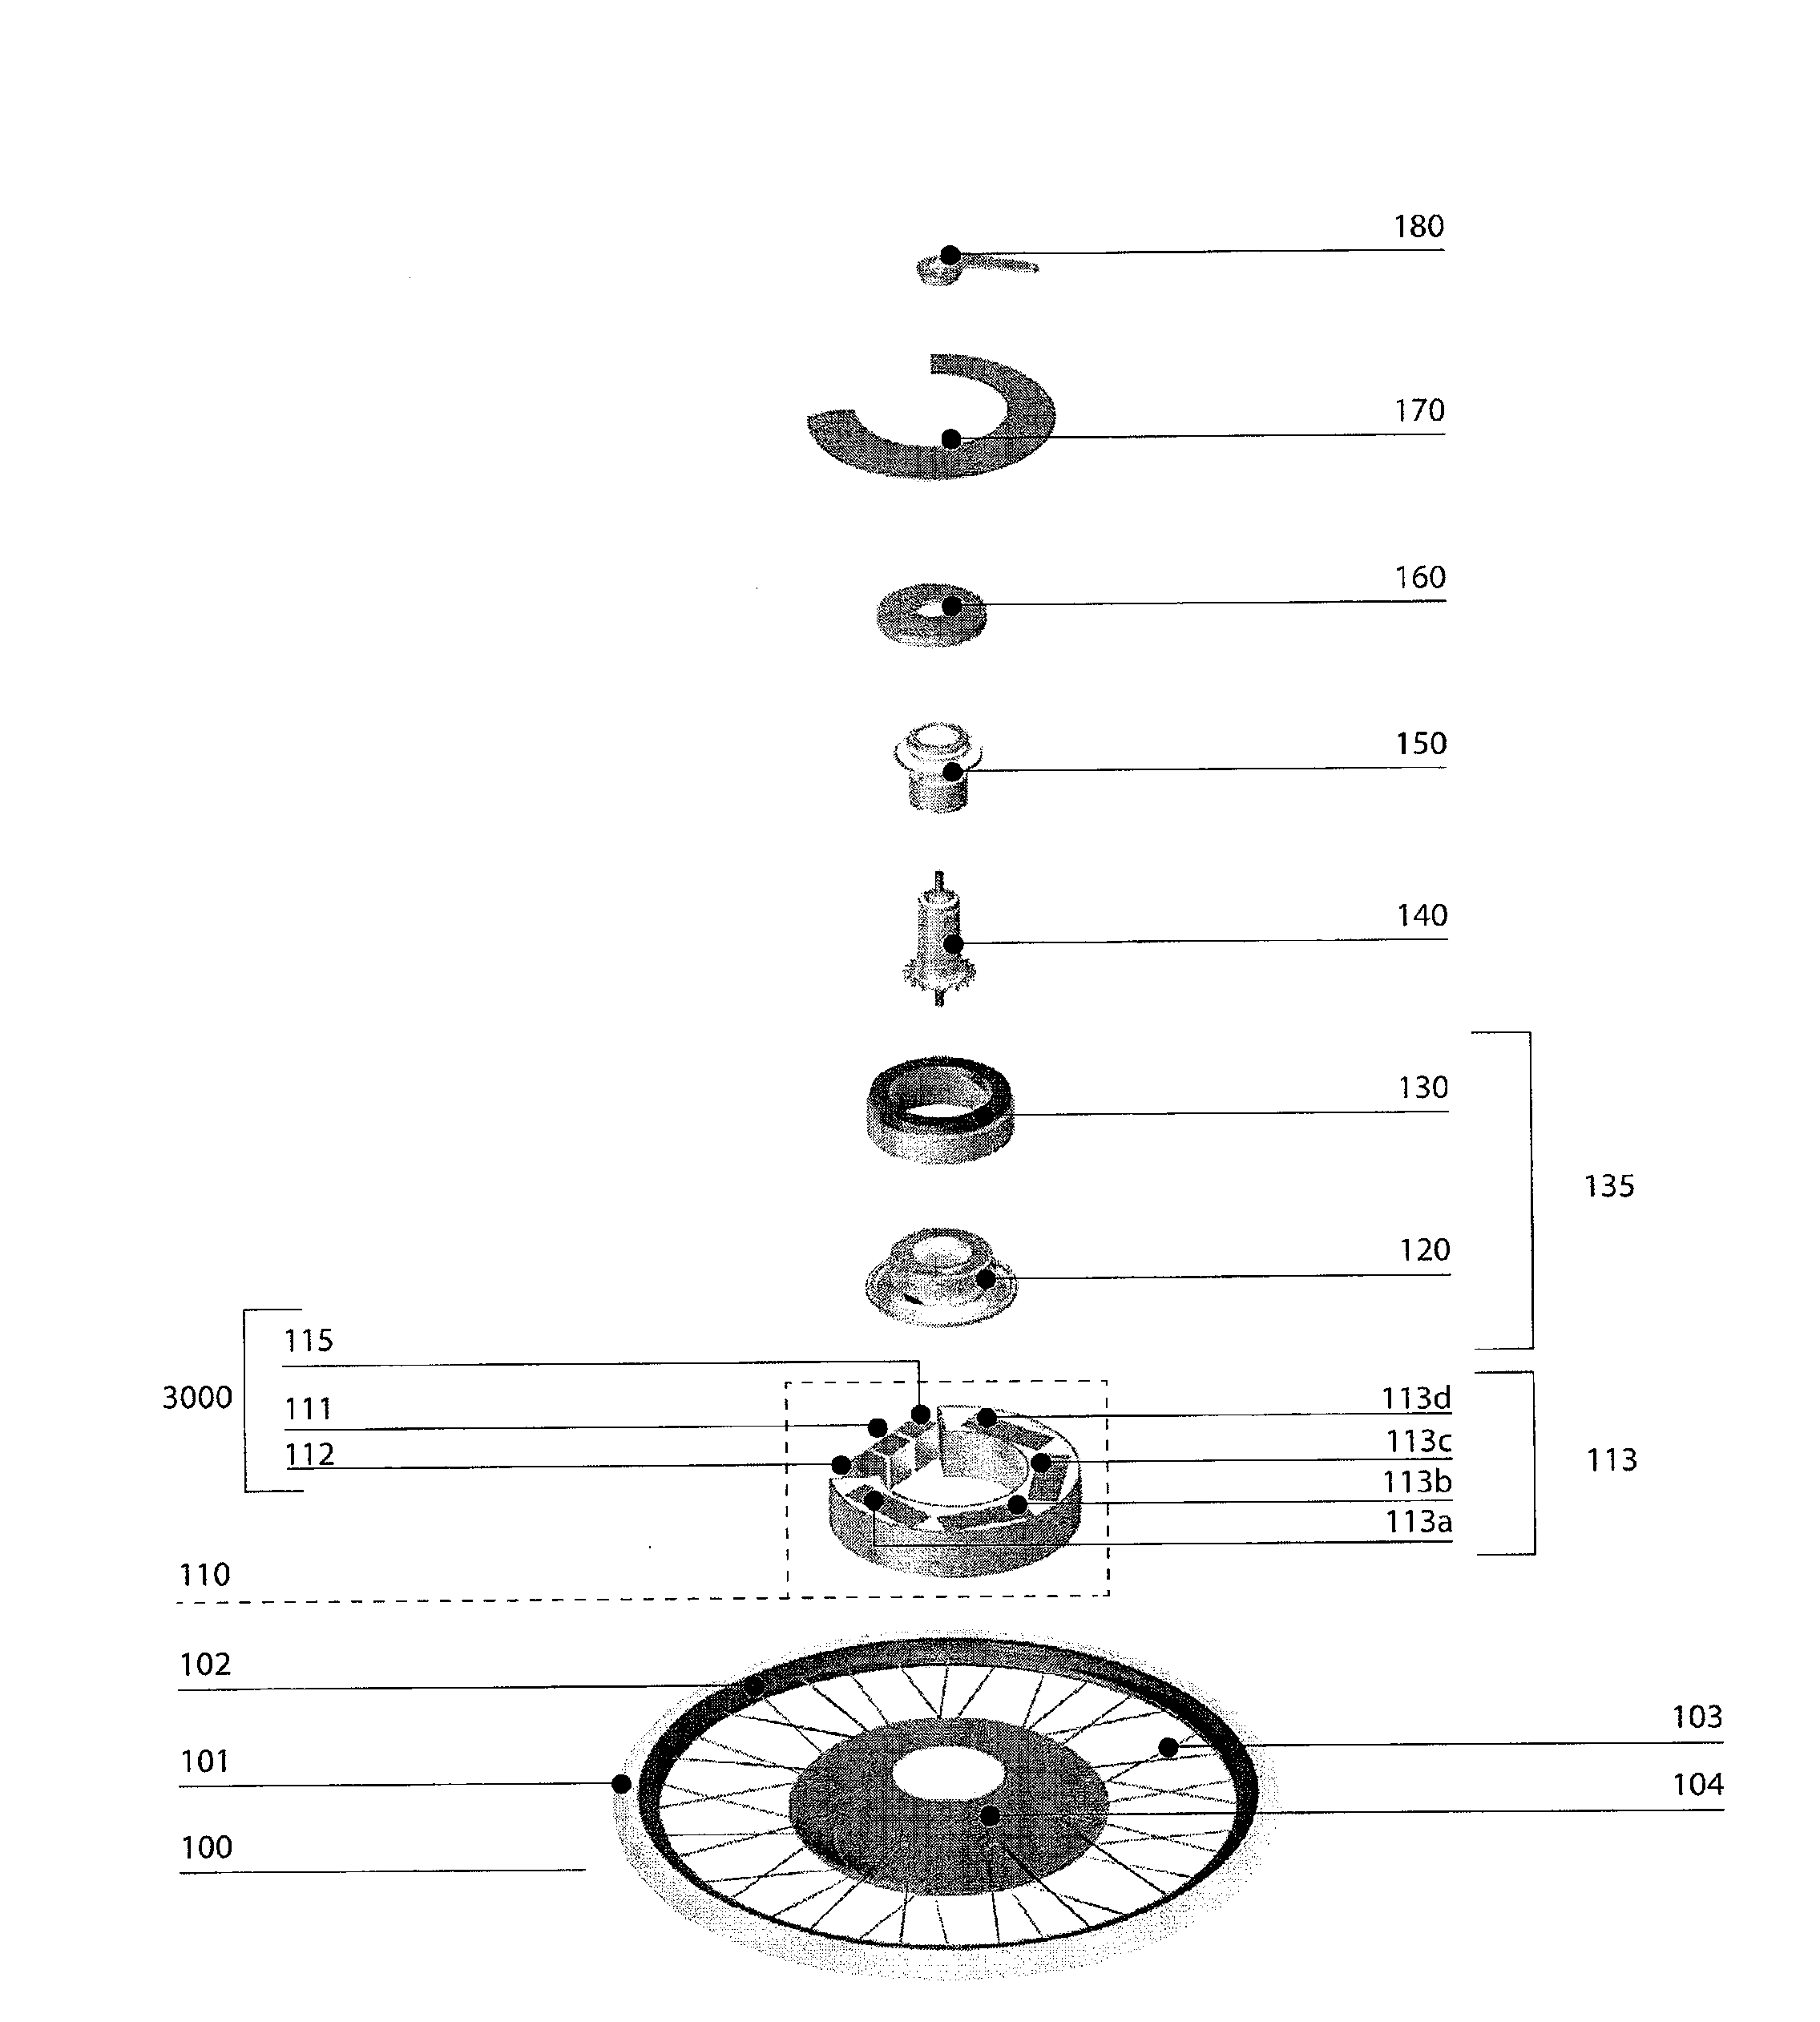 Hybrid sensor-enabled electric wheel and associated systems, multi-hub wheel spoking systems, and methods of manufacturing and installing wheel spokes